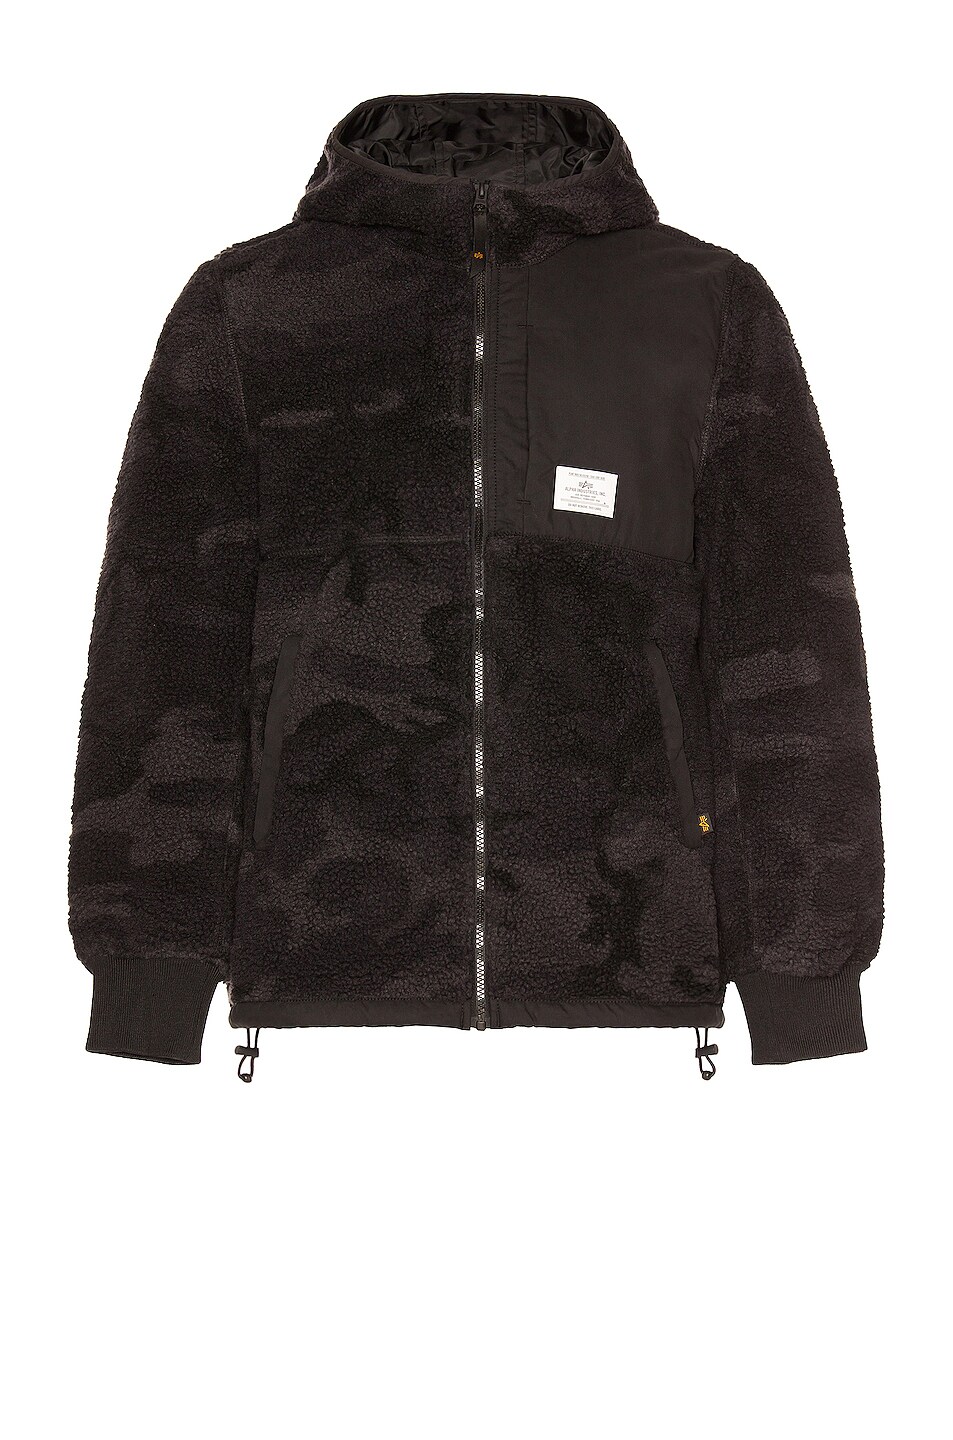 Image 1 of ALPHA INDUSTRIES Hooded Sherpa Utility Jacket in Woodland Black Camo